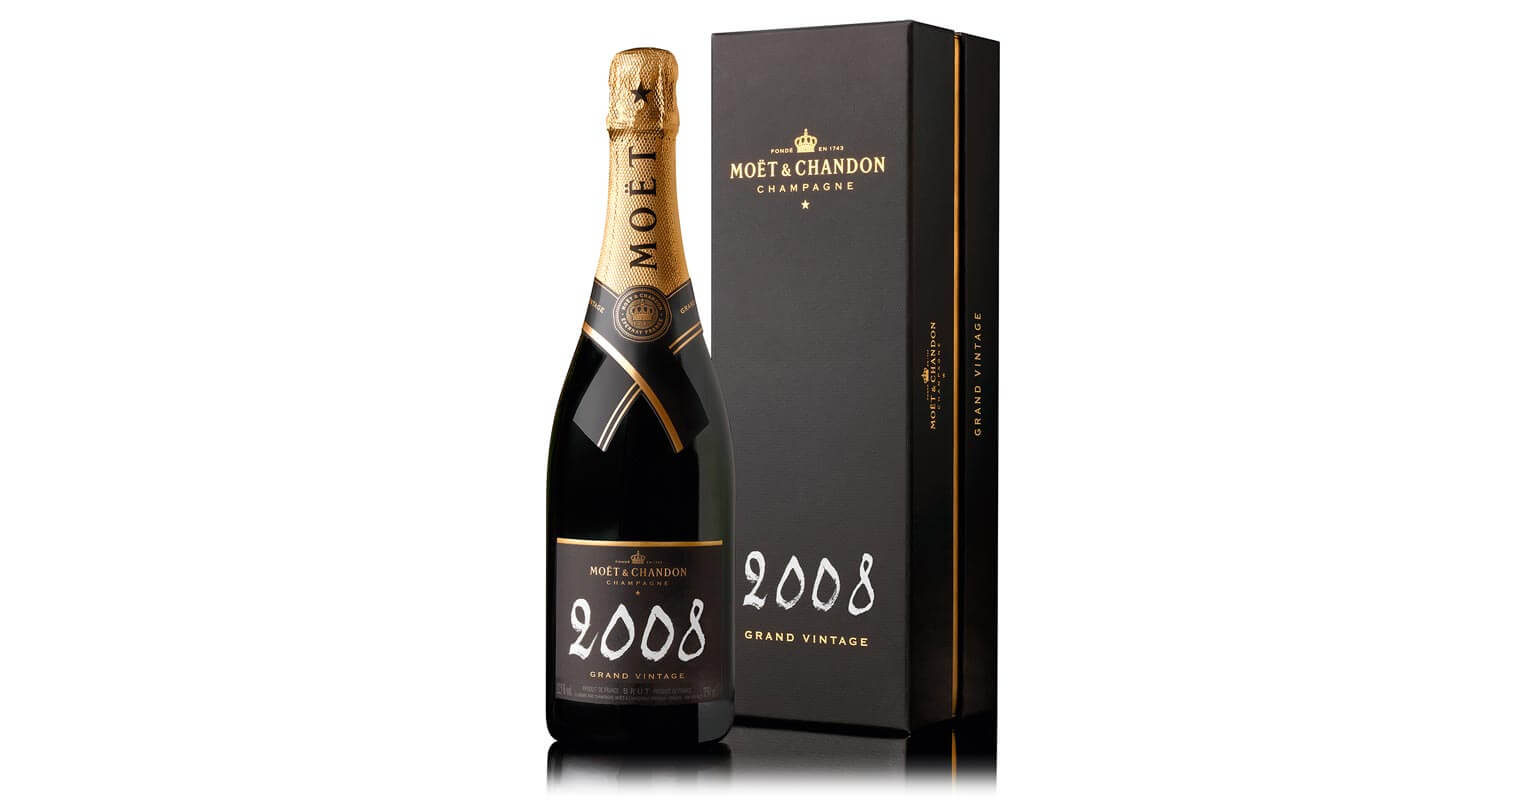 Moët & Chandon’s new vintage champagne, the 2008 Grand Vintage Brut, is now available nationwide…